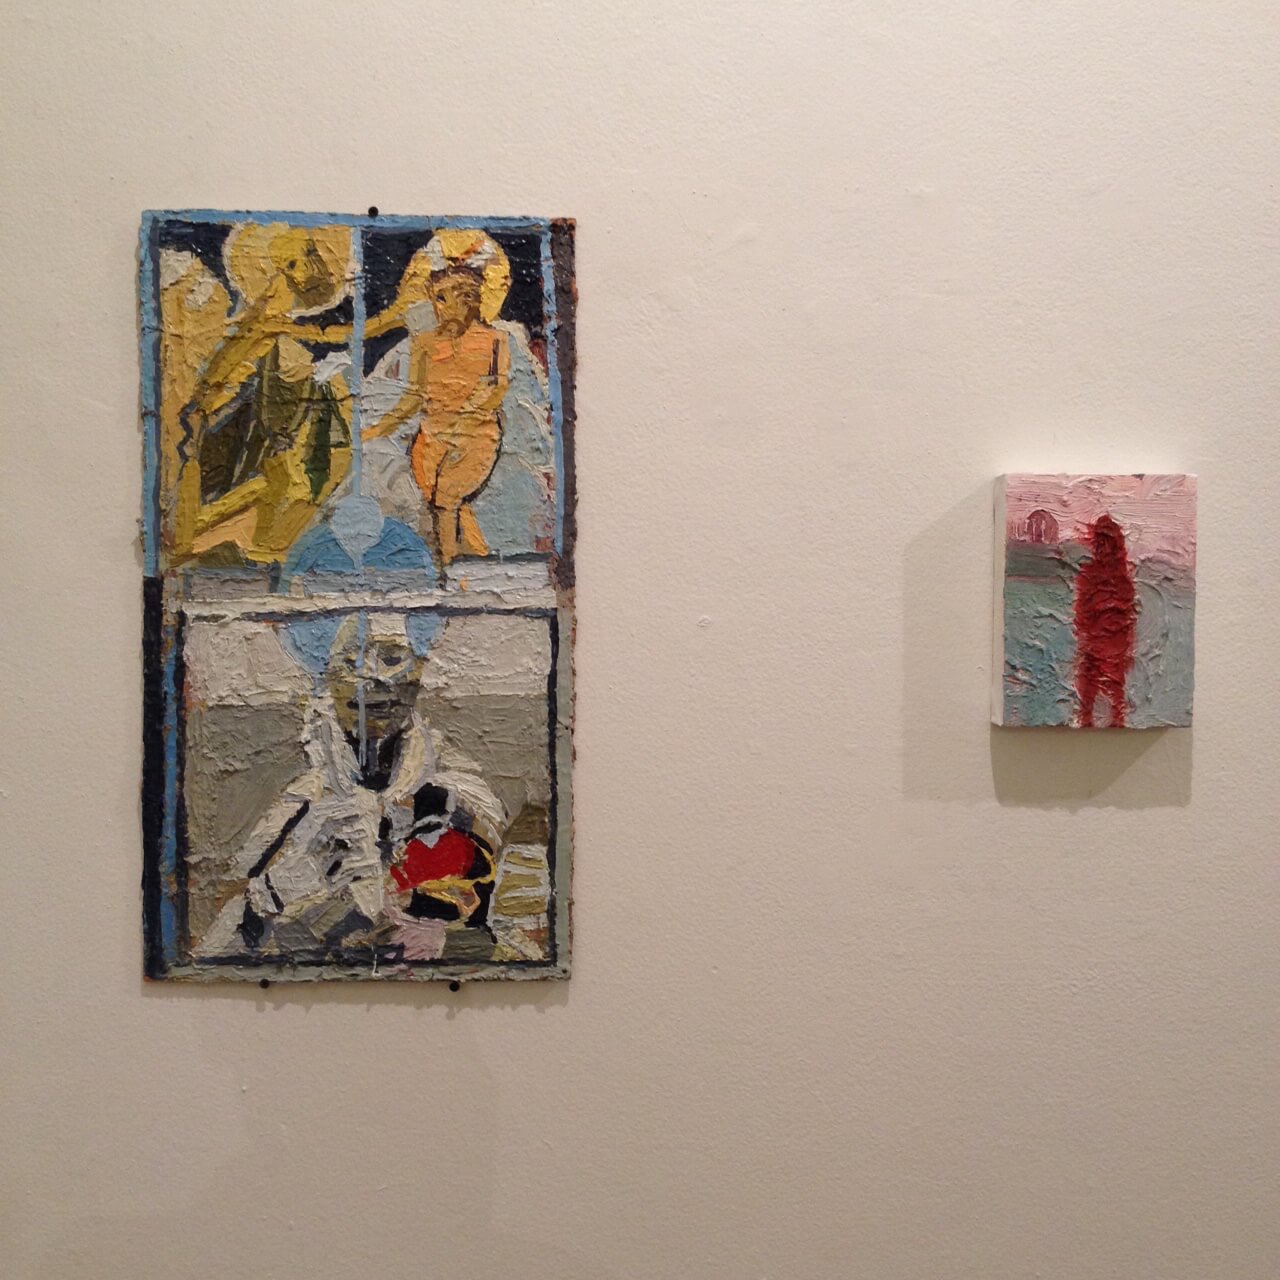 Left to right: Works by Clintel Steed and Carlo D'Anselmi in the Baras room.